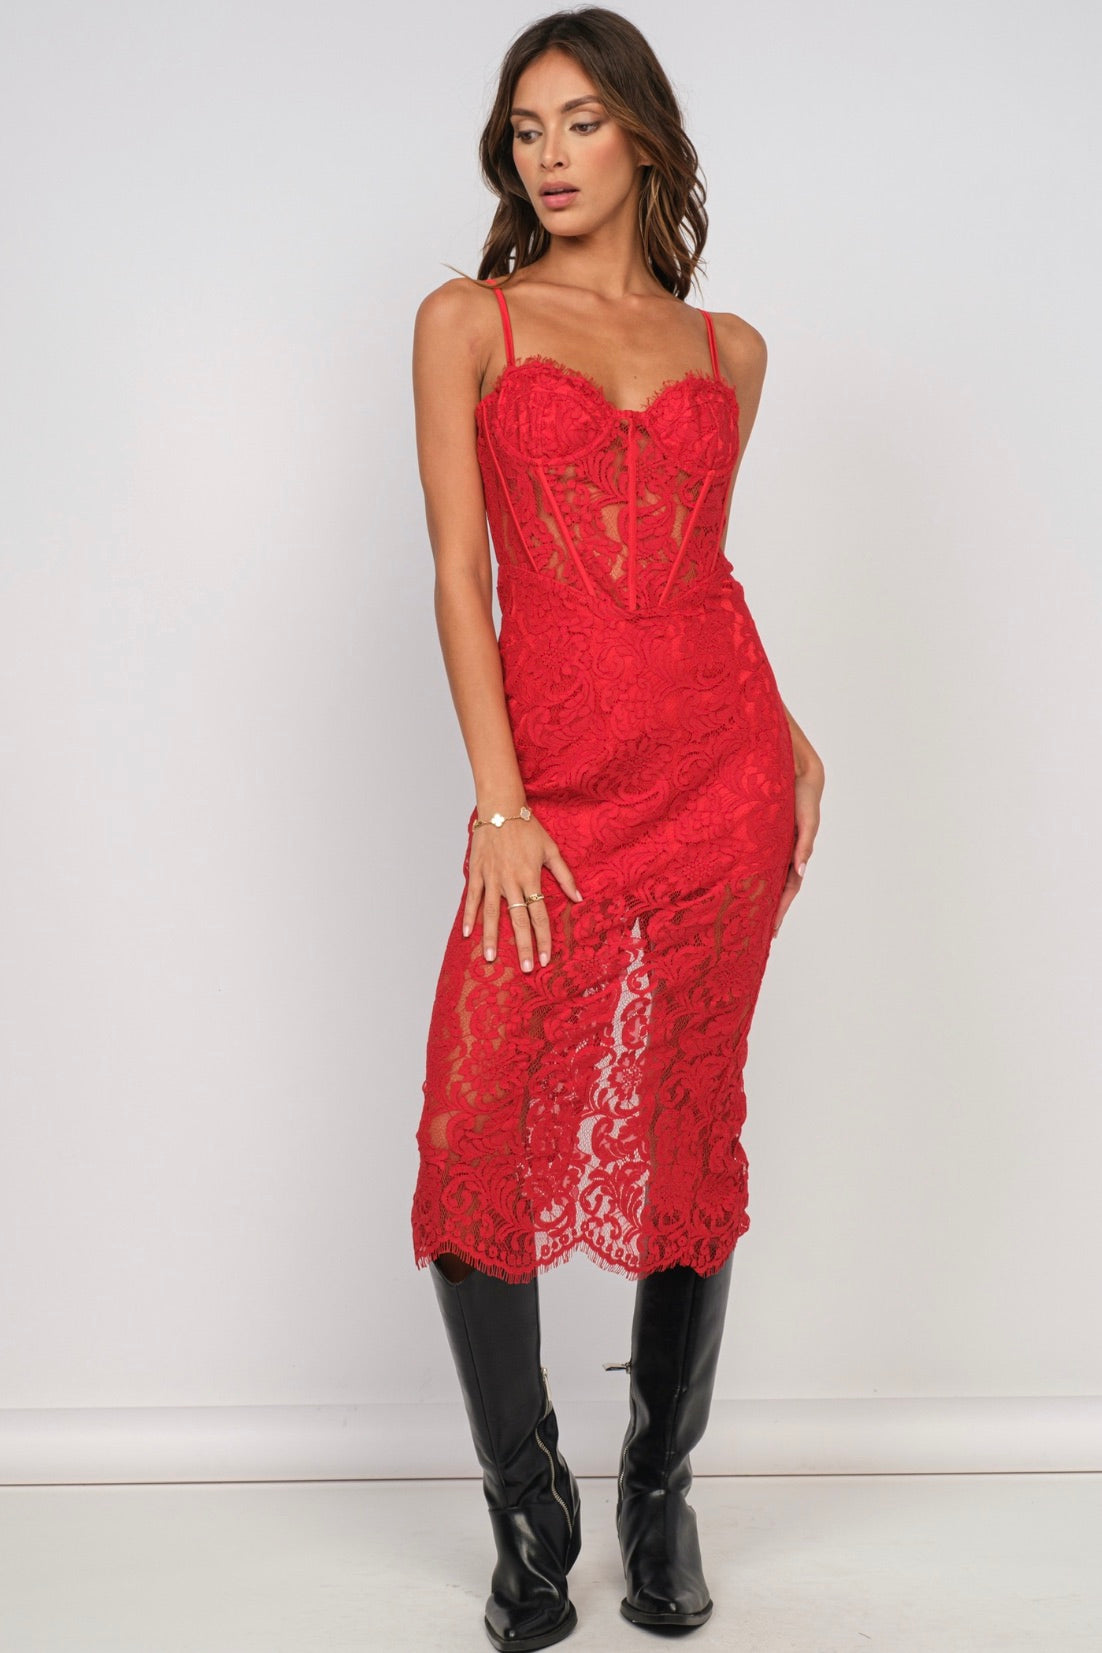 Sky to Moon red lace dress